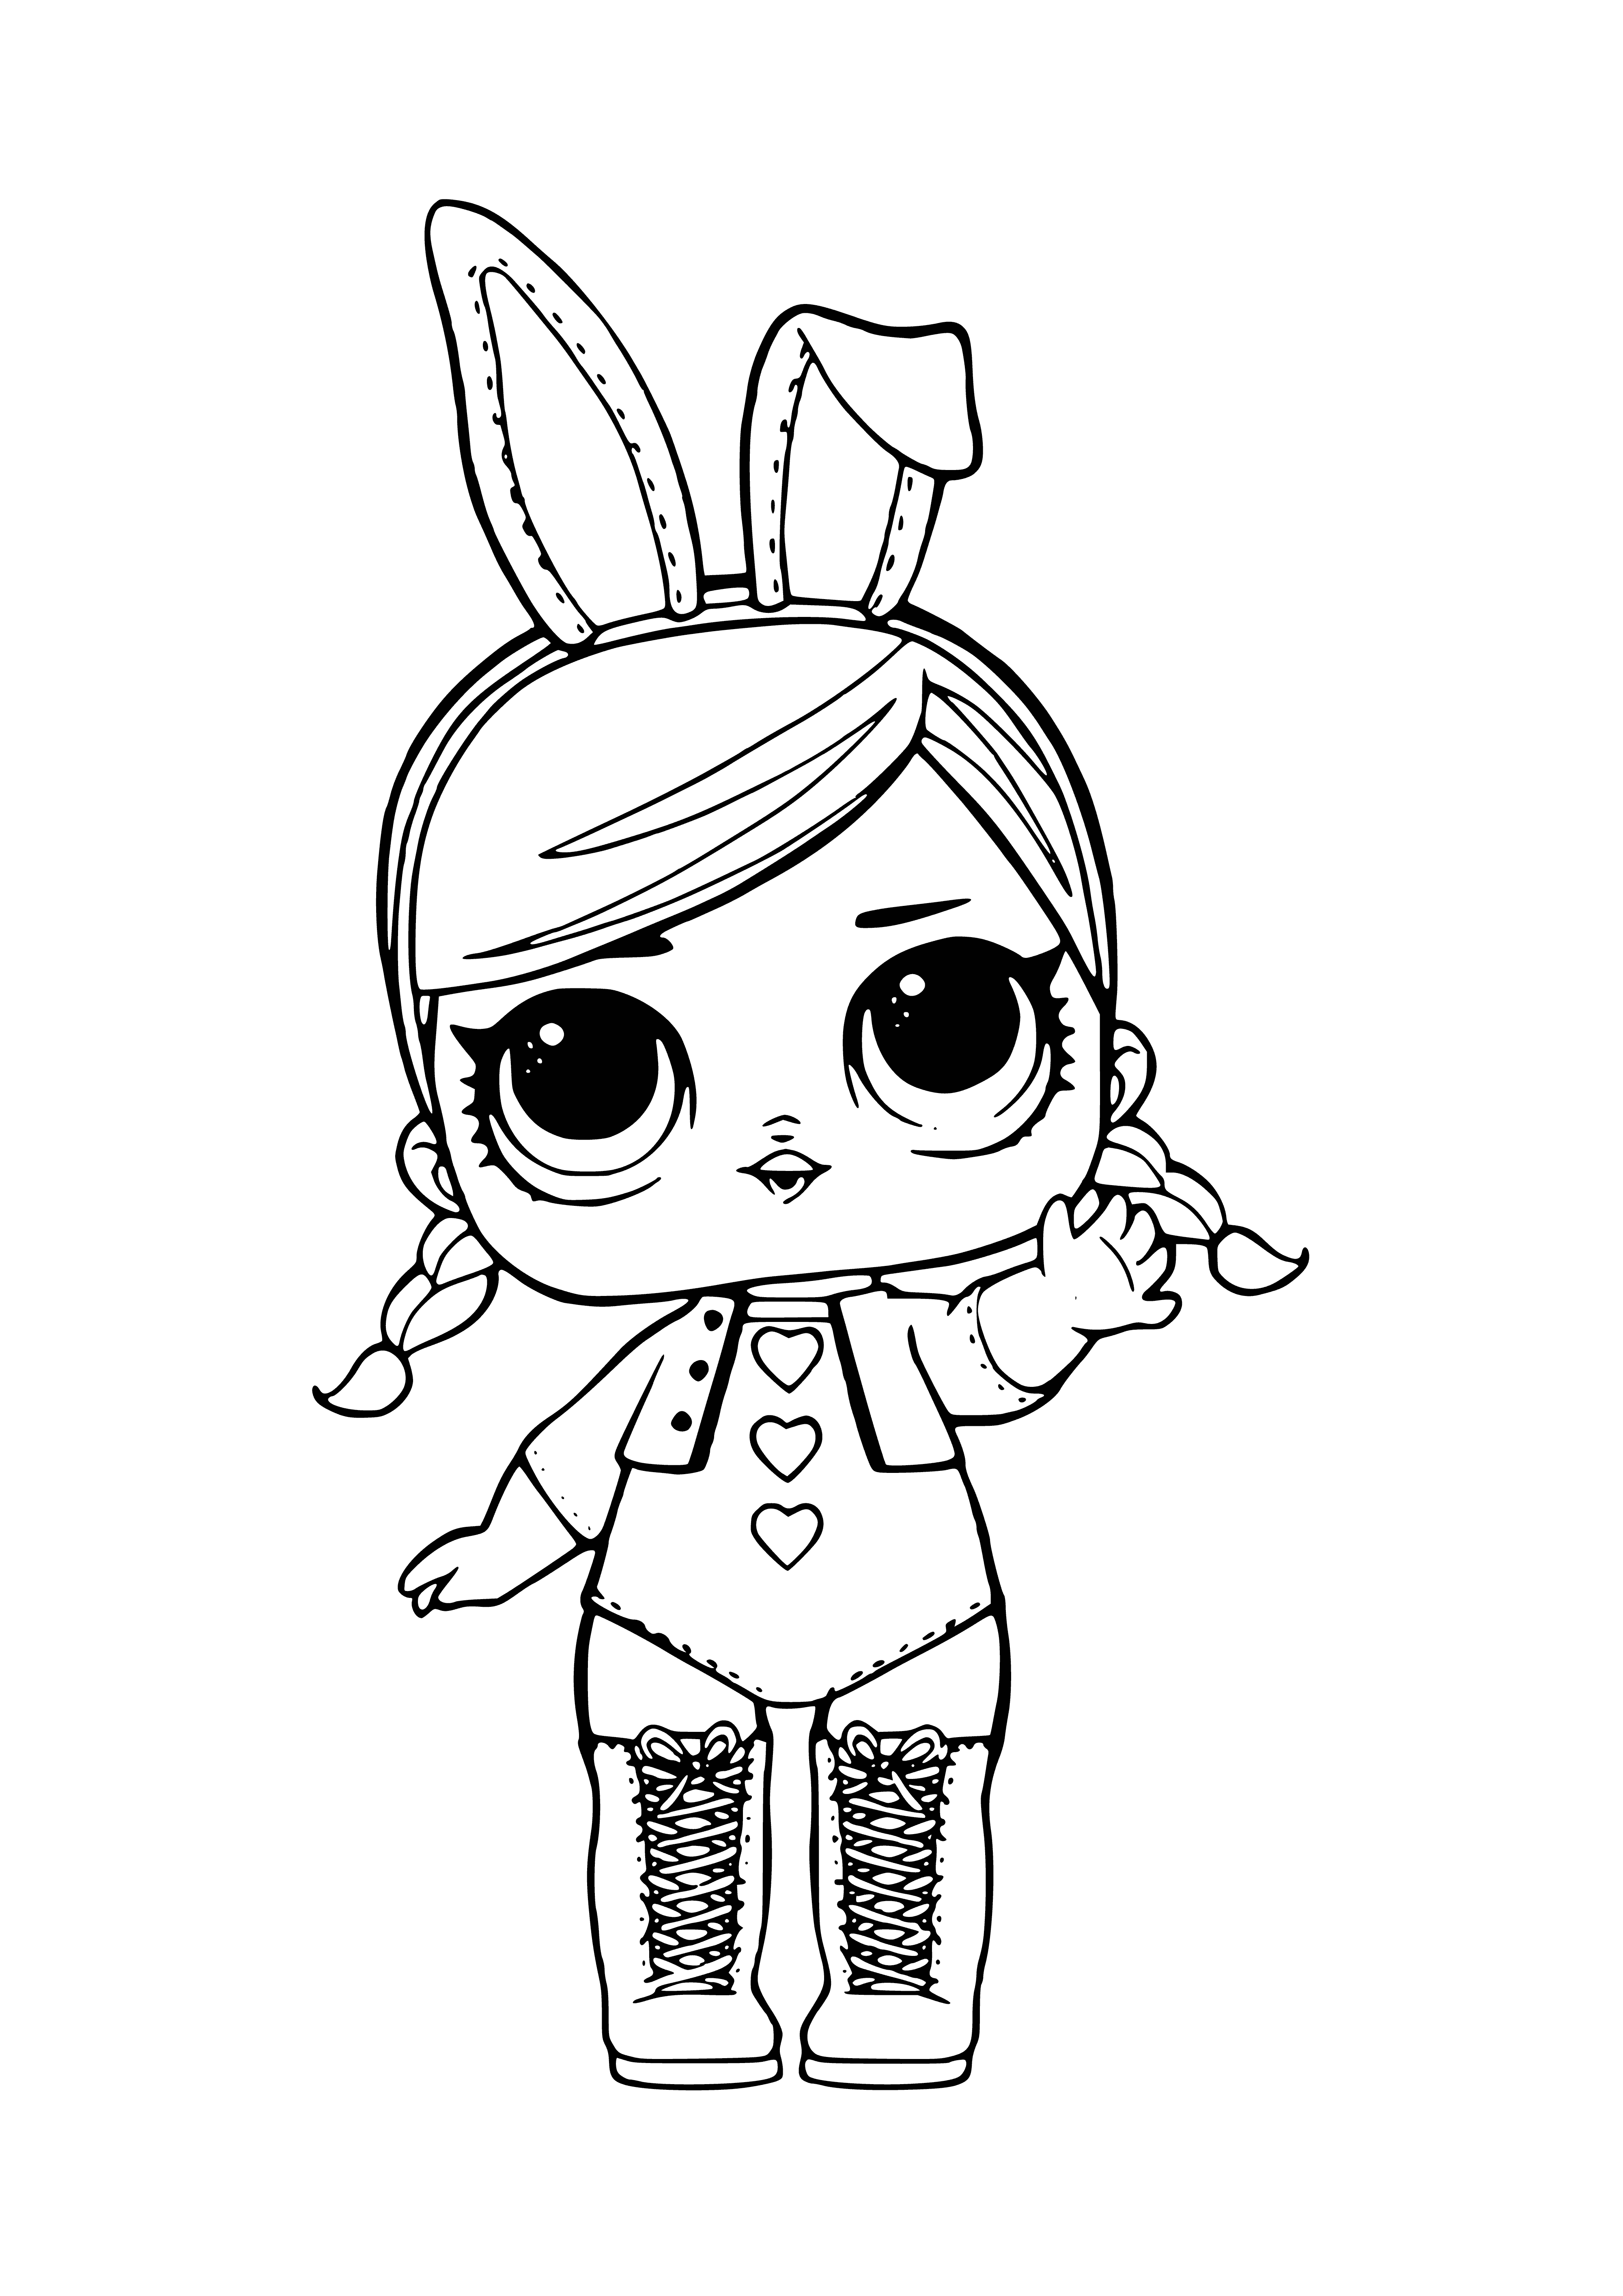 coloring page: The bunnies are back and playing a game of hide and seek. Whoever finds the hidden bunny wins a treat! Giggles and fun assured!